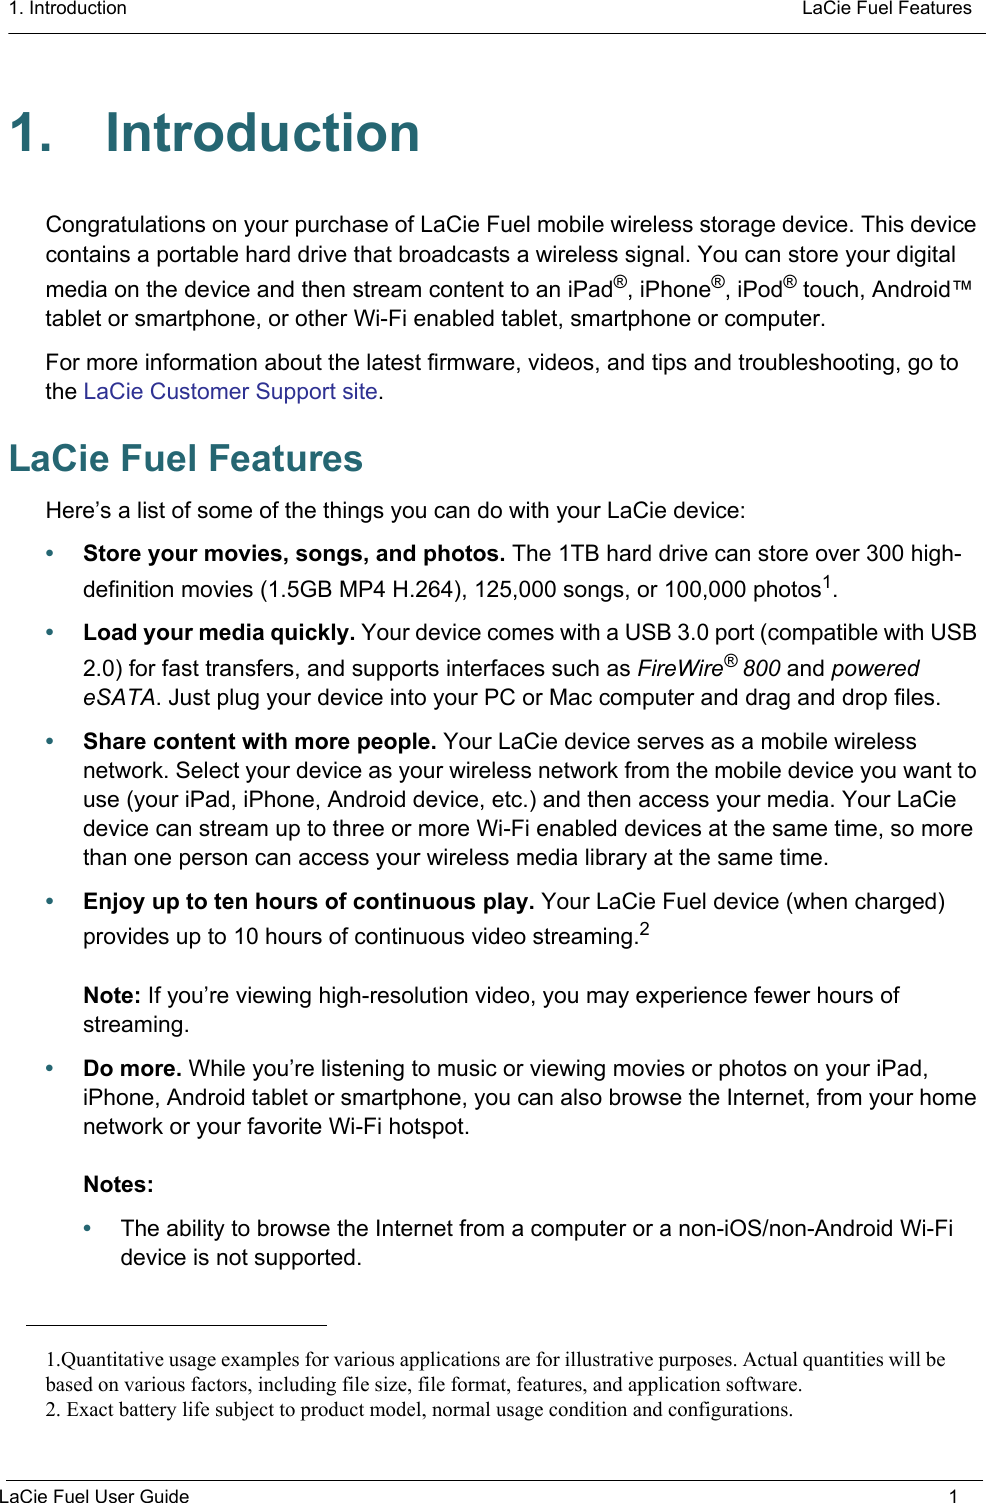 1. Introduction  LaCie Fuel FeaturesLaCie Fuel User Guide 11. IntroductionCongratulations on your purchase of LaCie Fuel mobile wireless storage device. This device contains a portable hard drive that broadcasts a wireless signal. You can store your digital media on the device and then stream content to an iPad®, iPhone®, iPod® touch, Android™ tablet or smartphone, or other Wi-Fi enabled tablet, smartphone or computer. For more information about the latest firmware, videos, and tips and troubleshooting, go to the LaCie Customer Support site. LaCie Fuel FeaturesHere’s a list of some of the things you can do with your LaCie device:•Store your movies, songs, and photos. The 1TB hard drive can store over 300 high- definition movies (1.5GB MP4 H.264), 125,000 songs, or 100,000 photos1.•Load your media quickly. Your device comes with a USB 3.0 port (compatible with USB 2.0) for fast transfers, and supports interfaces such as FireWire® 800 and powered eSATA. Just plug your device into your PC or Mac computer and drag and drop files.•Share content with more people. Your LaCie device serves as a mobile wireless network. Select your device as your wireless network from the mobile device you want to use (your iPad, iPhone, Android device, etc.) and then access your media. Your LaCie device can stream up to three or more Wi-Fi enabled devices at the same time, so more than one person can access your wireless media library at the same time.•Enjoy up to ten hours of continuous play. Your LaCie Fuel device (when charged) provides up to 10 hours of continuous video streaming.2Note: If you’re viewing high-resolution video, you may experience fewer hours of streaming.•Do more. While you’re listening to music or viewing movies or photos on your iPad, iPhone, Android tablet or smartphone, you can also browse the Internet, from your home network or your favorite Wi-Fi hotspot.Notes: •The ability to browse the Internet from a computer or a non-iOS/non-Android Wi-Fi device is not supported.1.Quantitative usage examples for various applications are for illustrative purposes. Actual quantities will bebased on various factors, including file size, file format, features, and application software.2. Exact battery life subject to product model, normal usage condition and configurations.